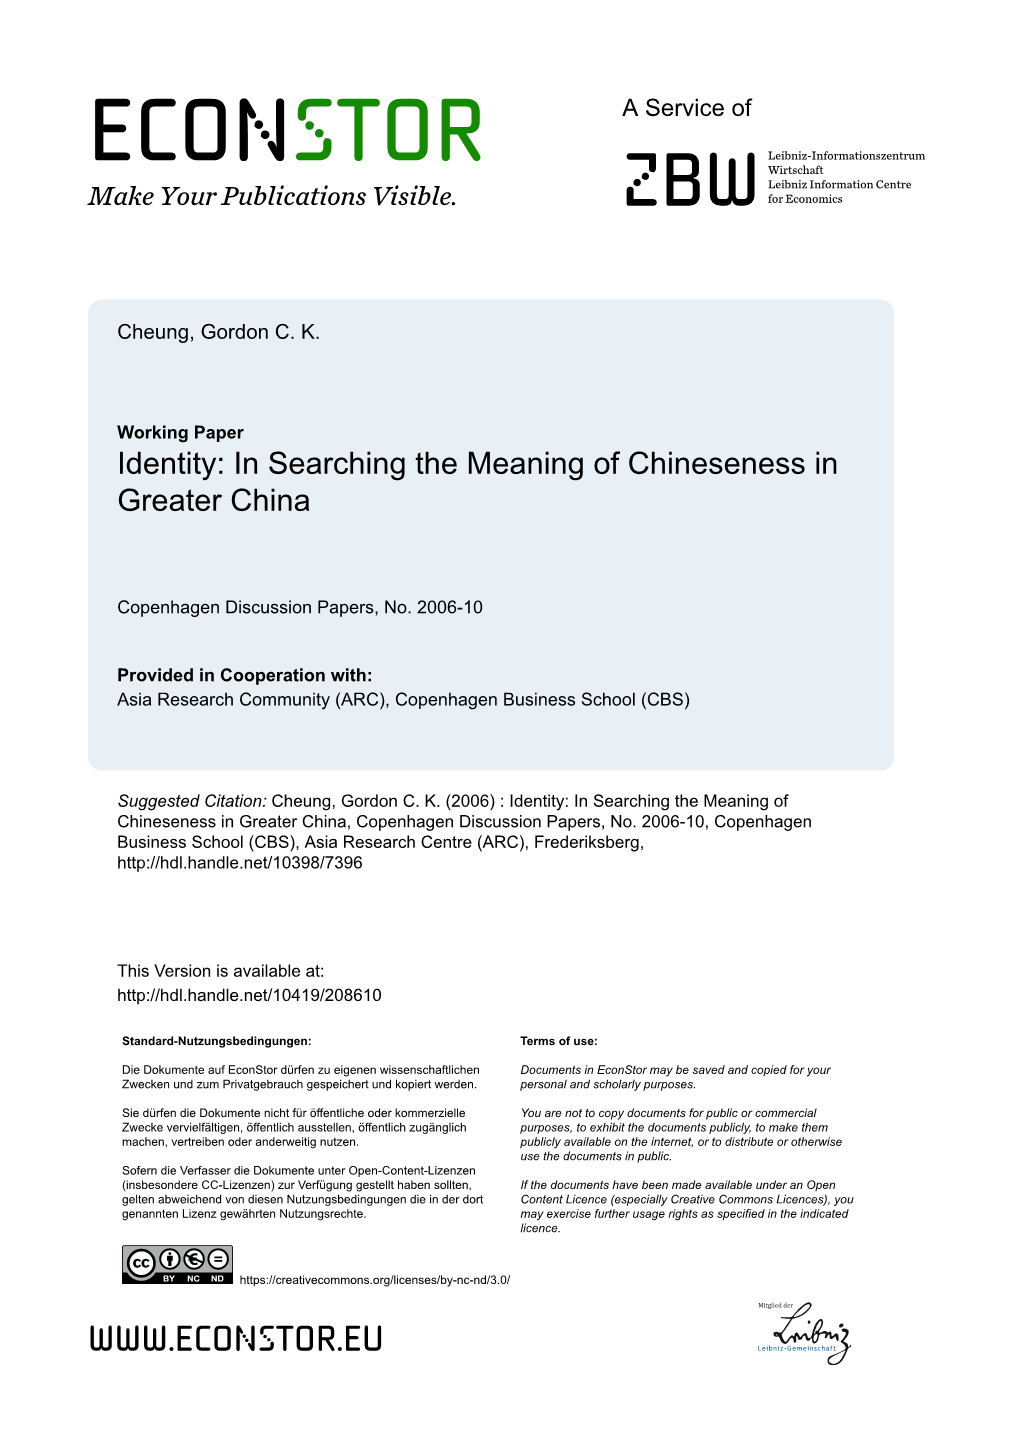 Identity: in Searching the Meaning of Chineseness in Greater China